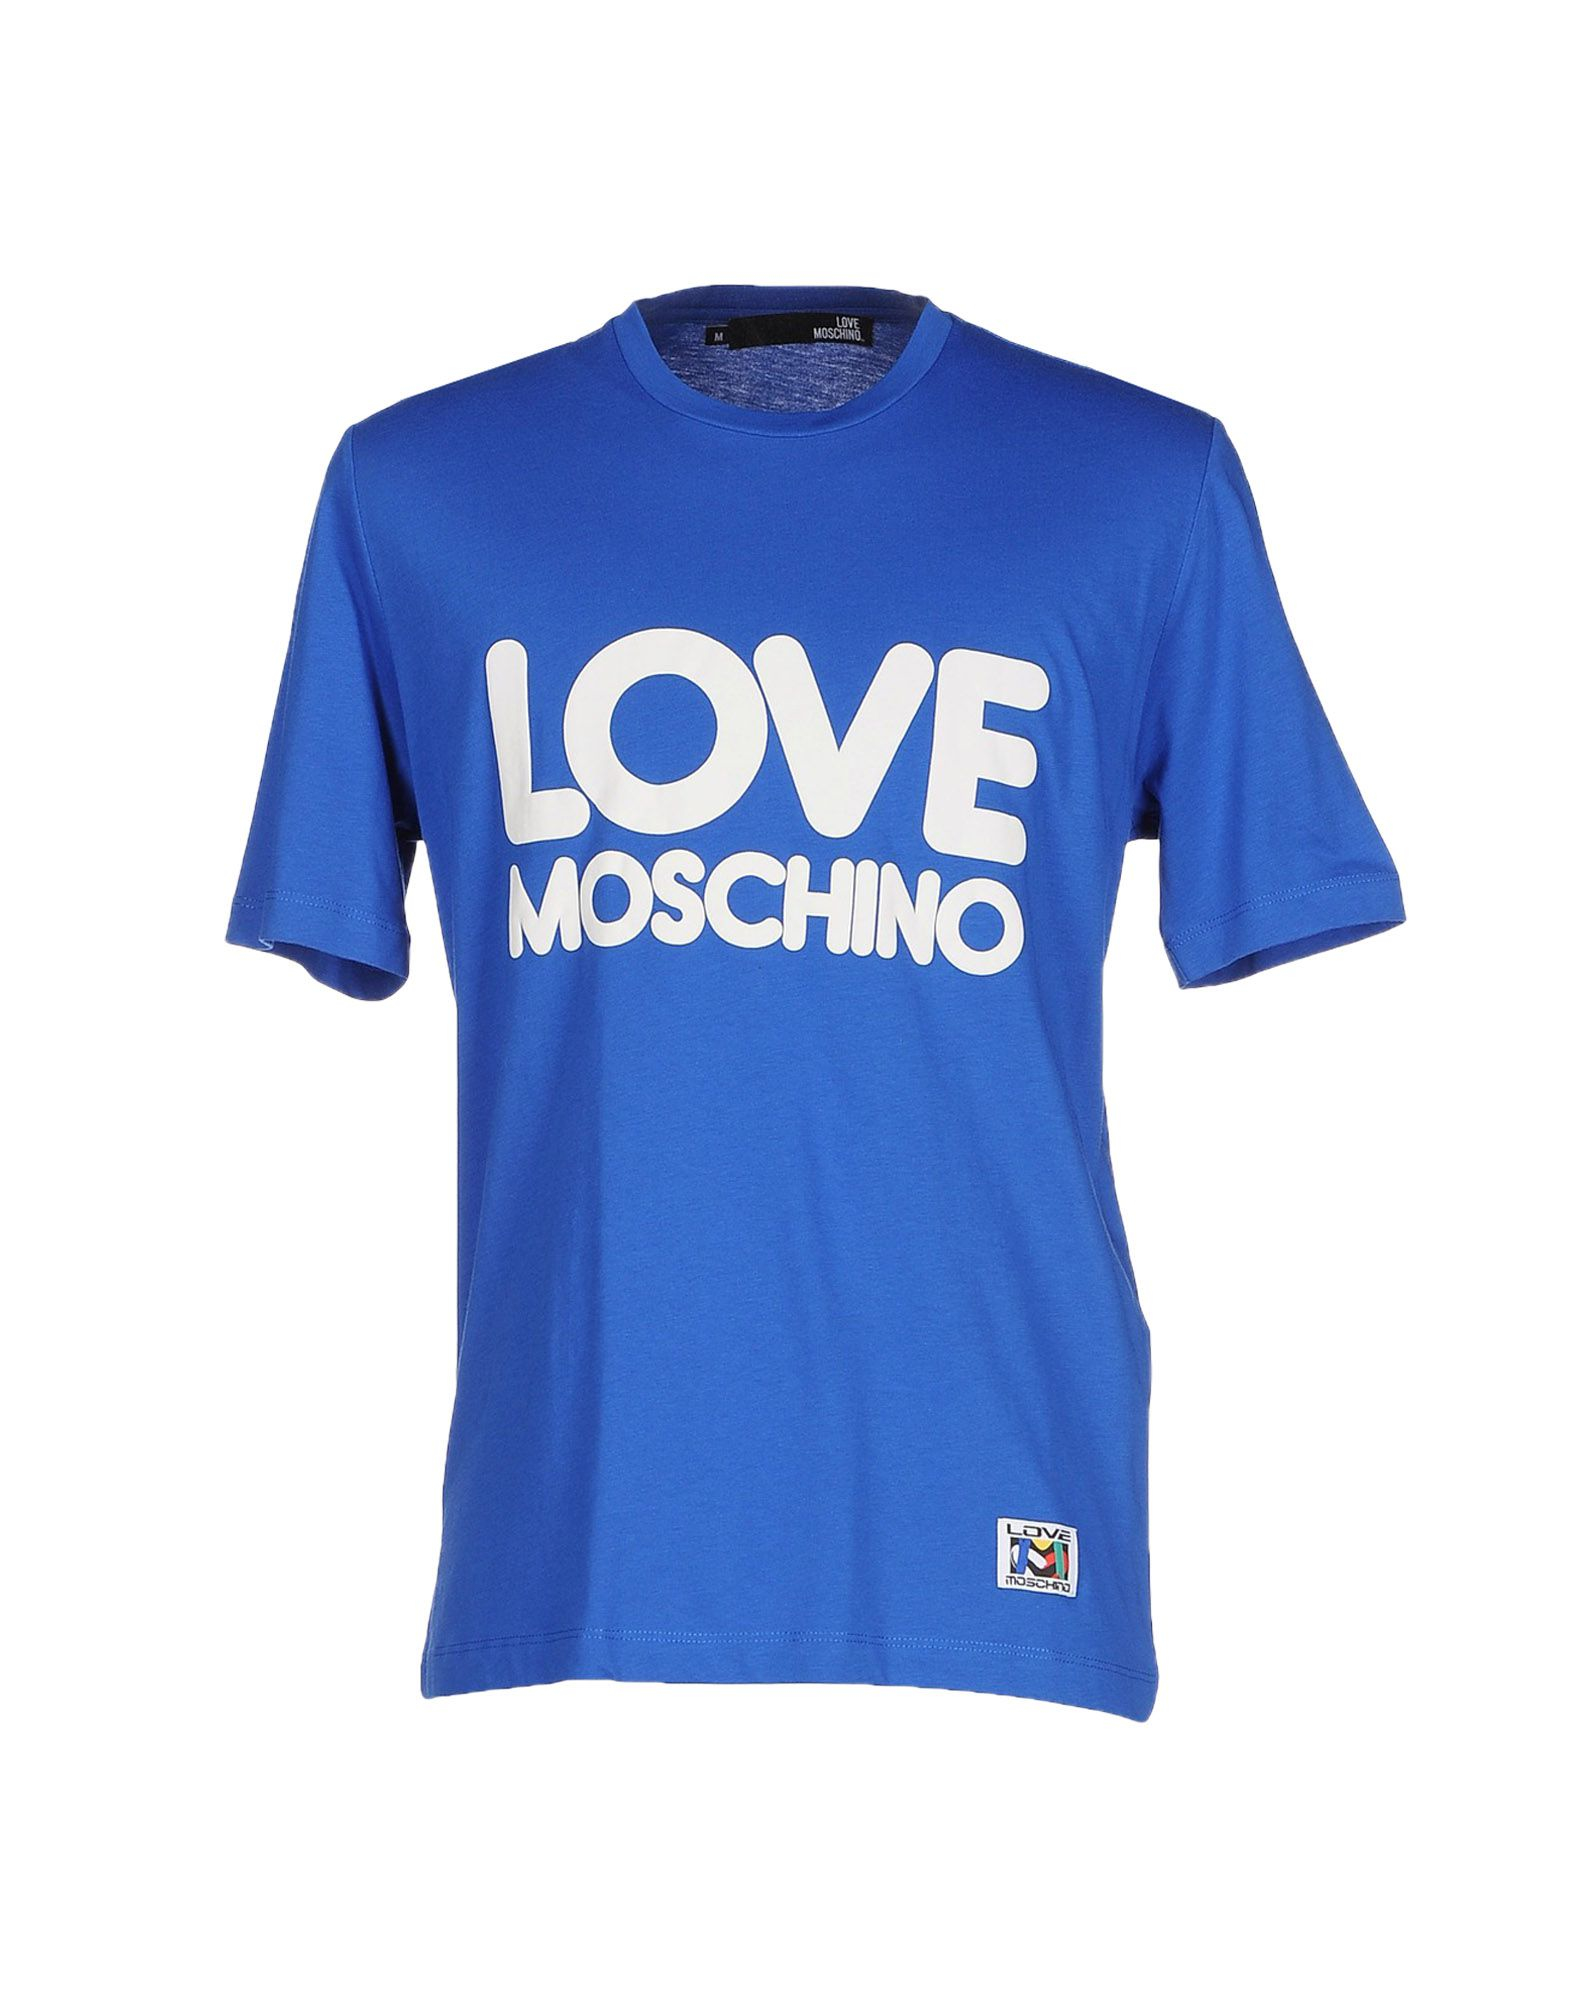 Love moschino T-shirt in Blue for Men | Lyst